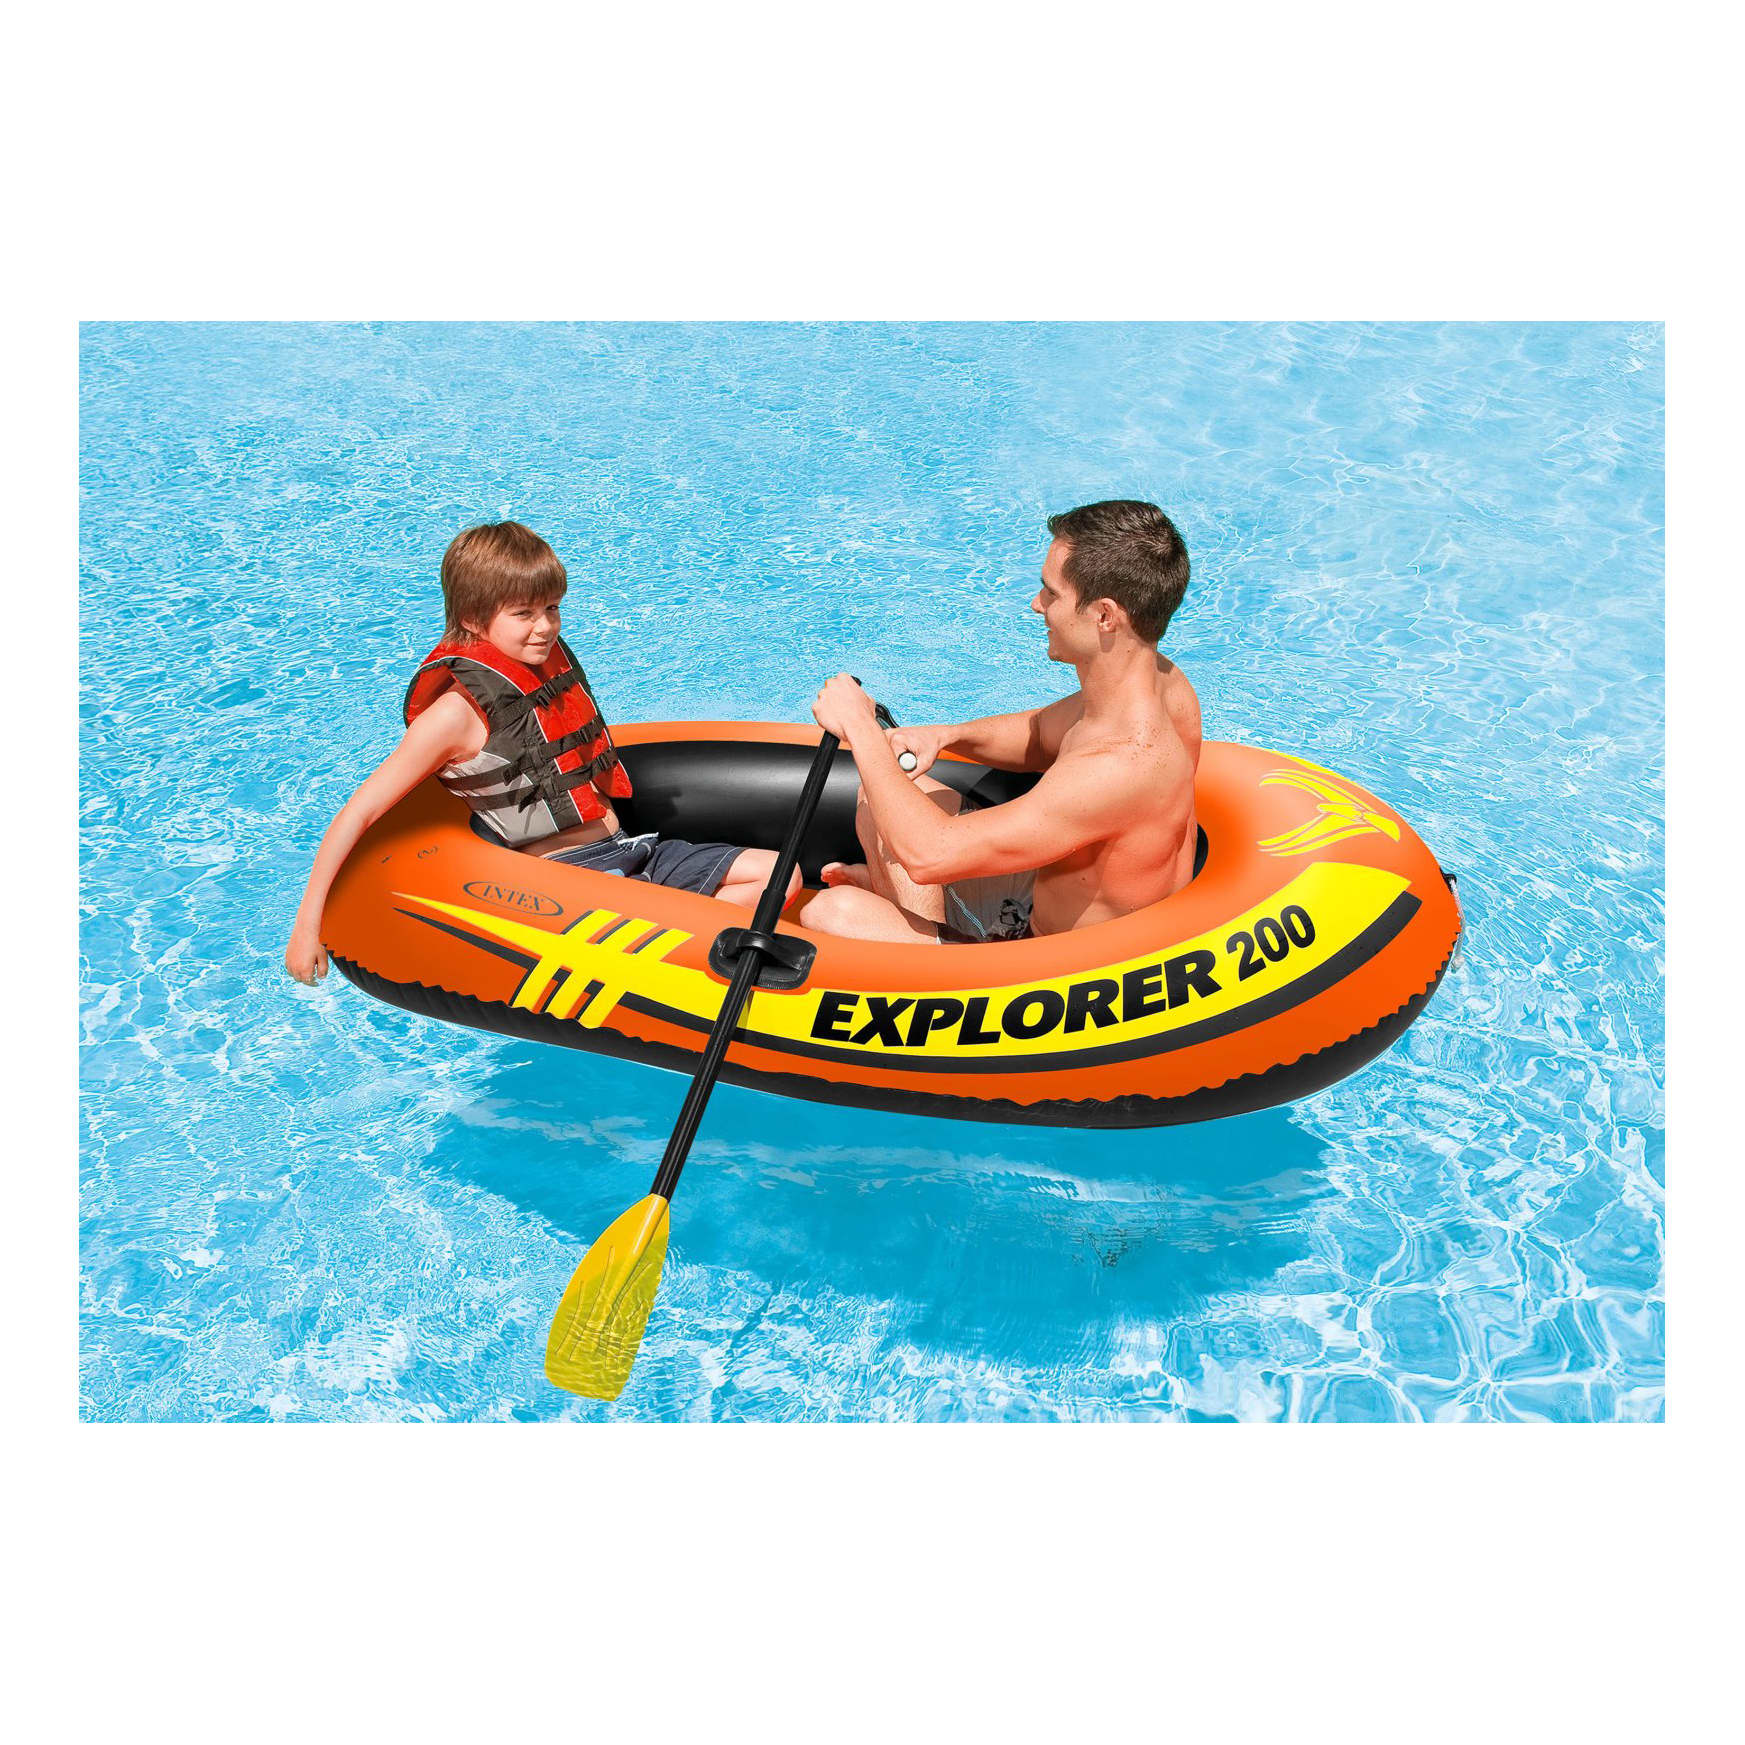 Intex® Explorer 200 Inflatable Boat - In the Field